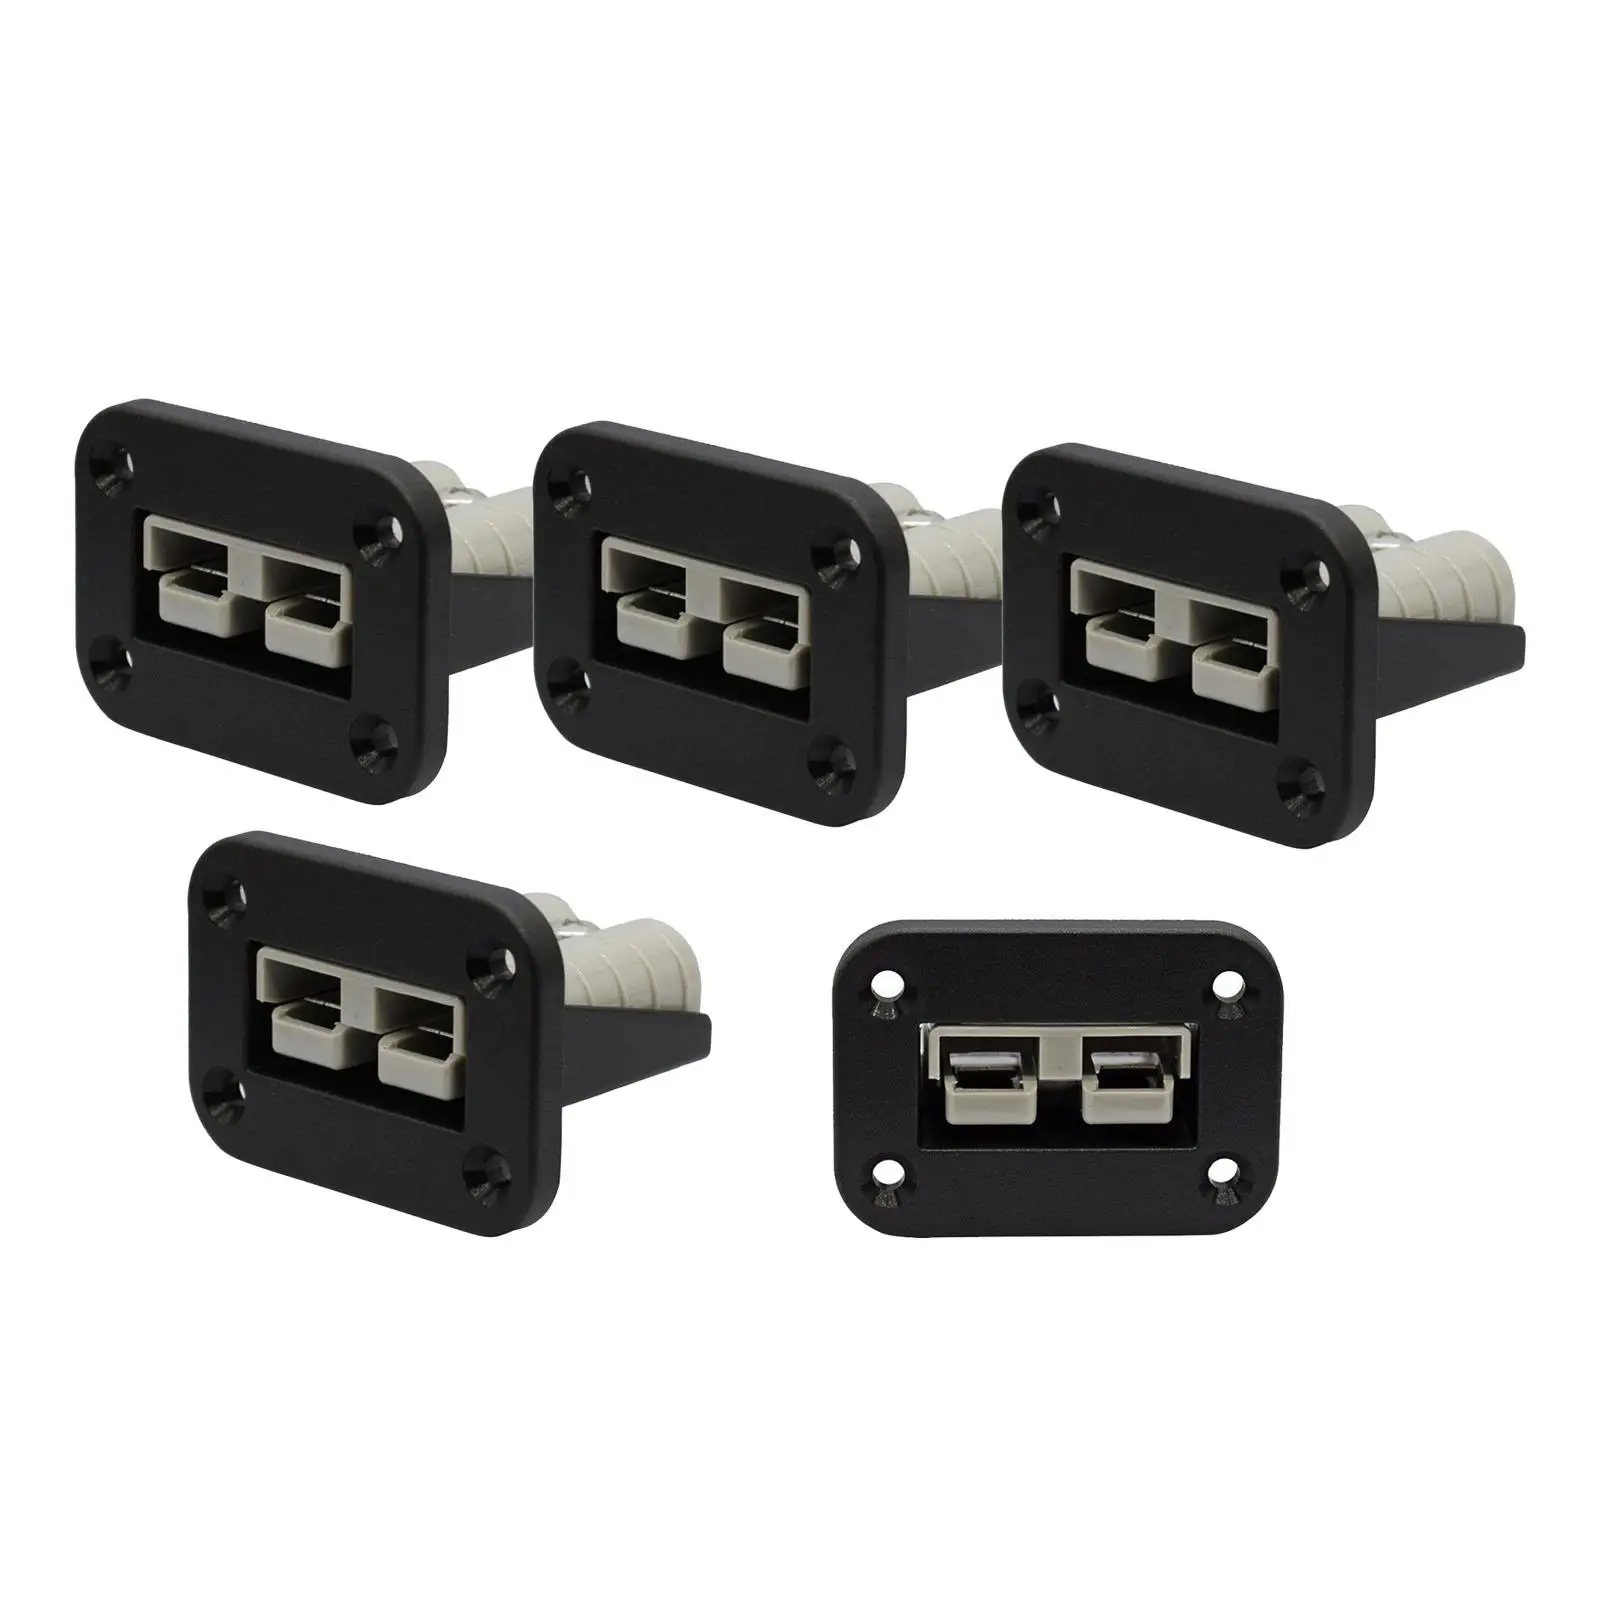 5Pcs 5 Plug Mounting Br ket Panel Cover Recessed Connector  Dual USB for  Truck Y hts Motorhomes Buses